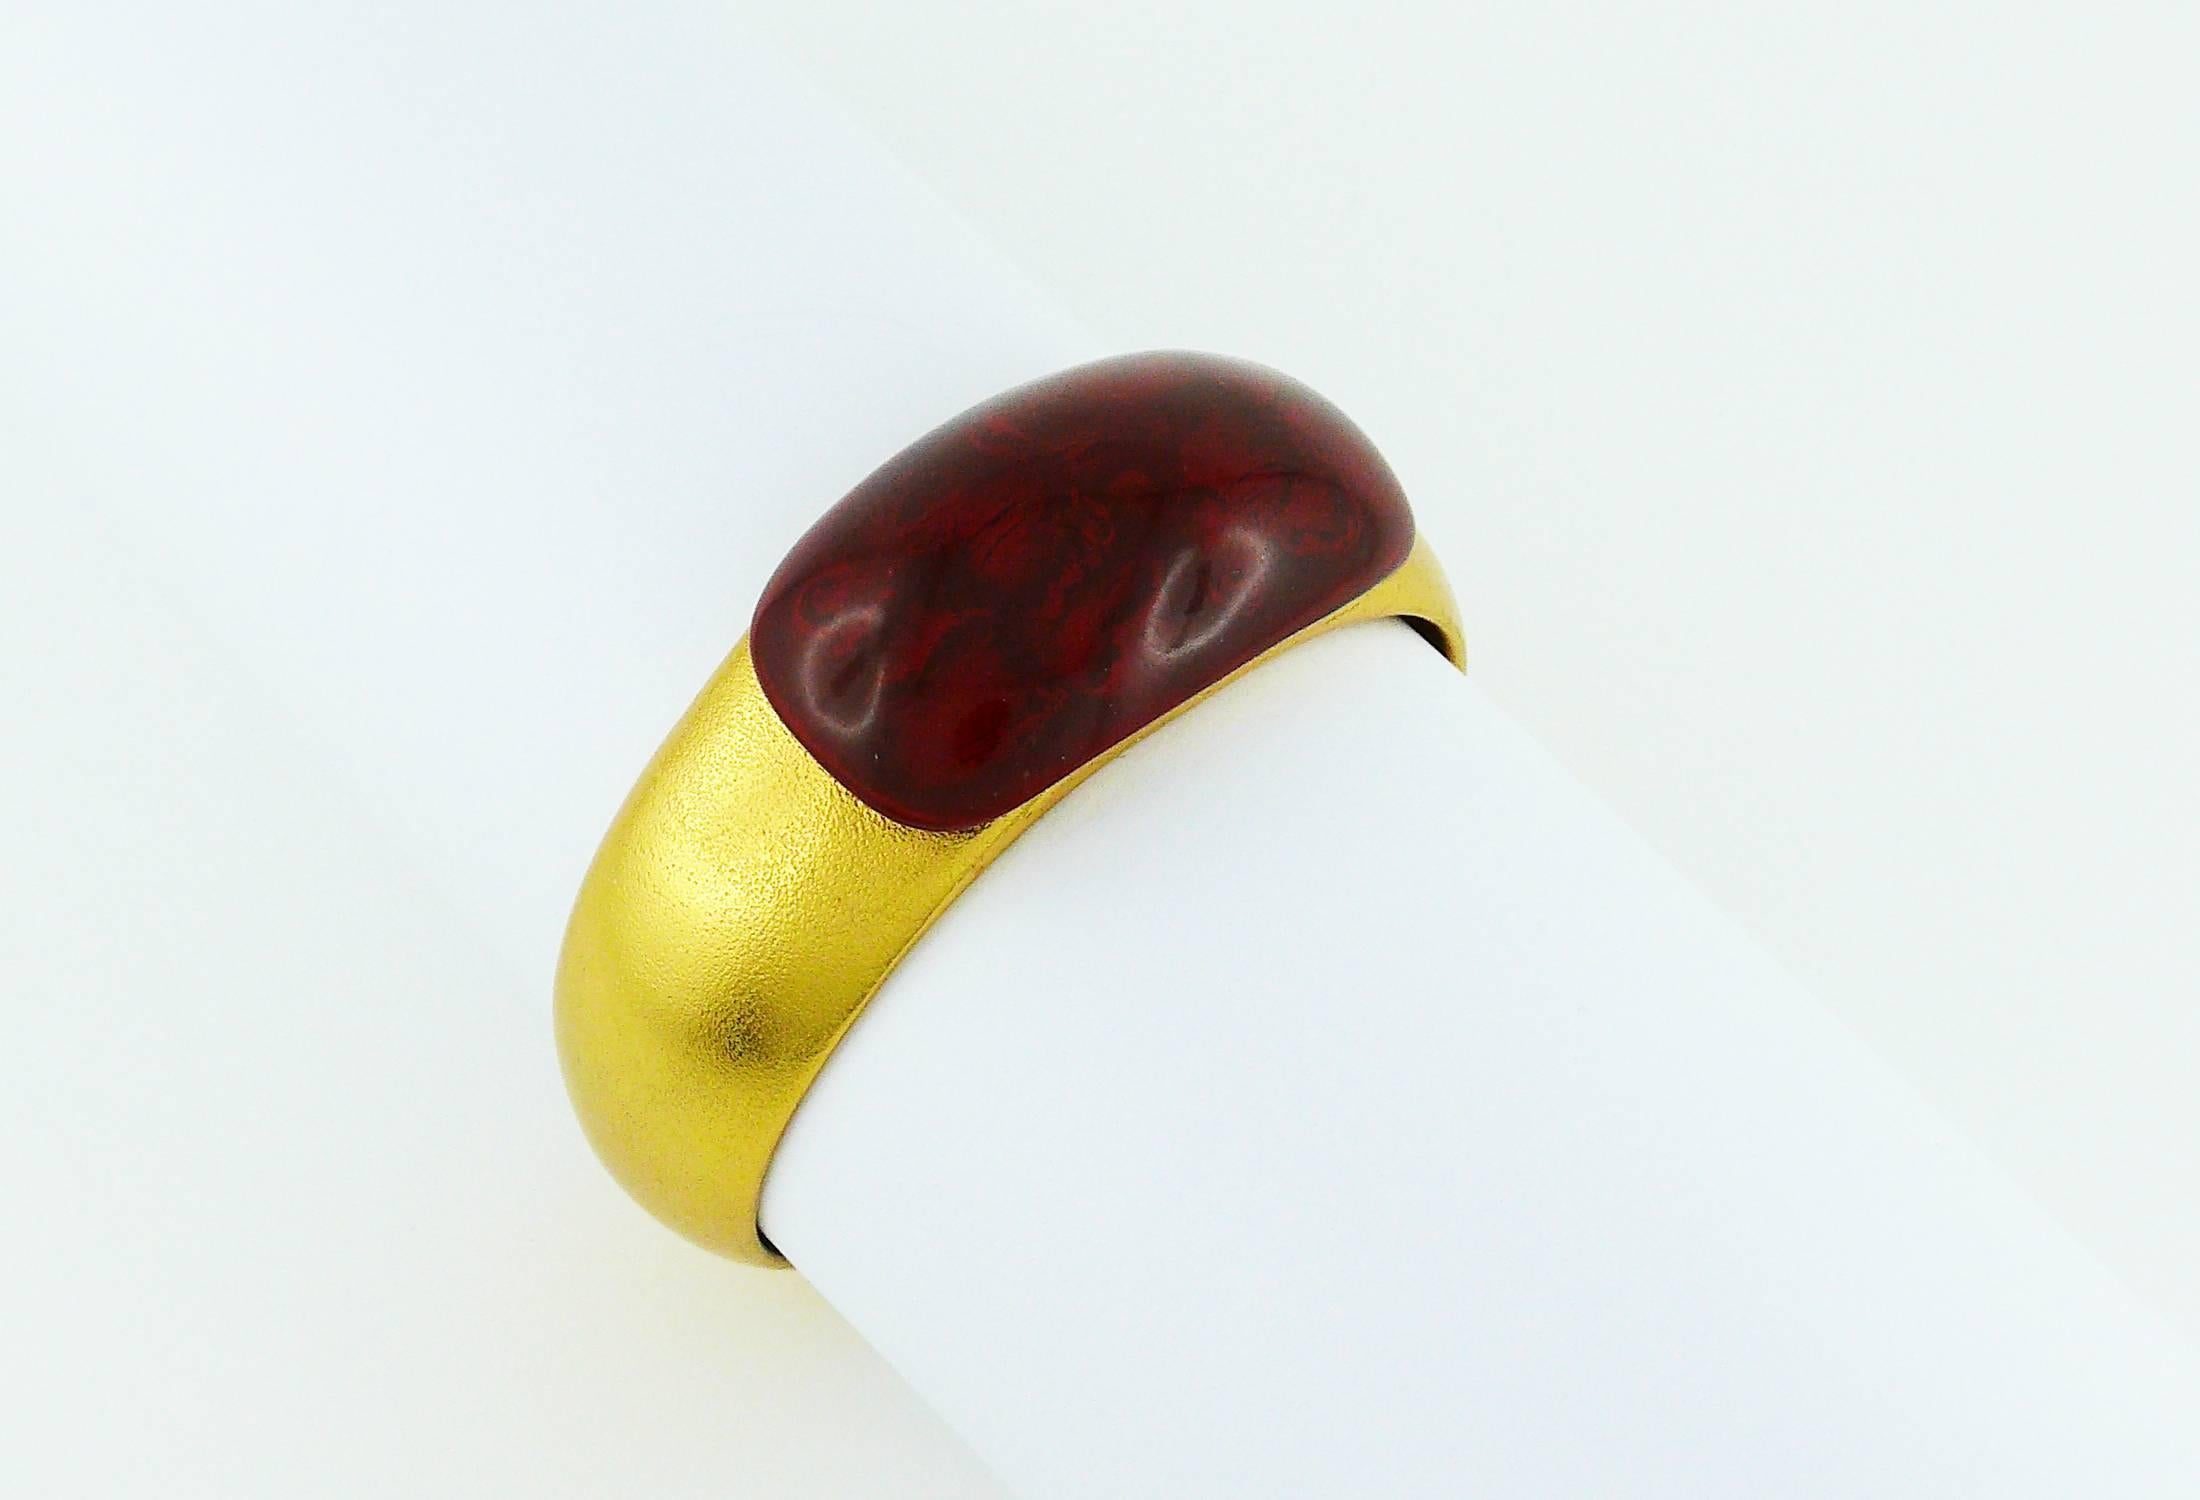 YVES SAINT LAURENT vintage gold toned bangle bracelet featuring a large red lucite cabochon.

Marked YSL Made in France.

Indicative measurements : inside circumference approx. 18.22 cm (7.17 inches) / width approx. 2 cm (0.79 inch).

JEWELRY